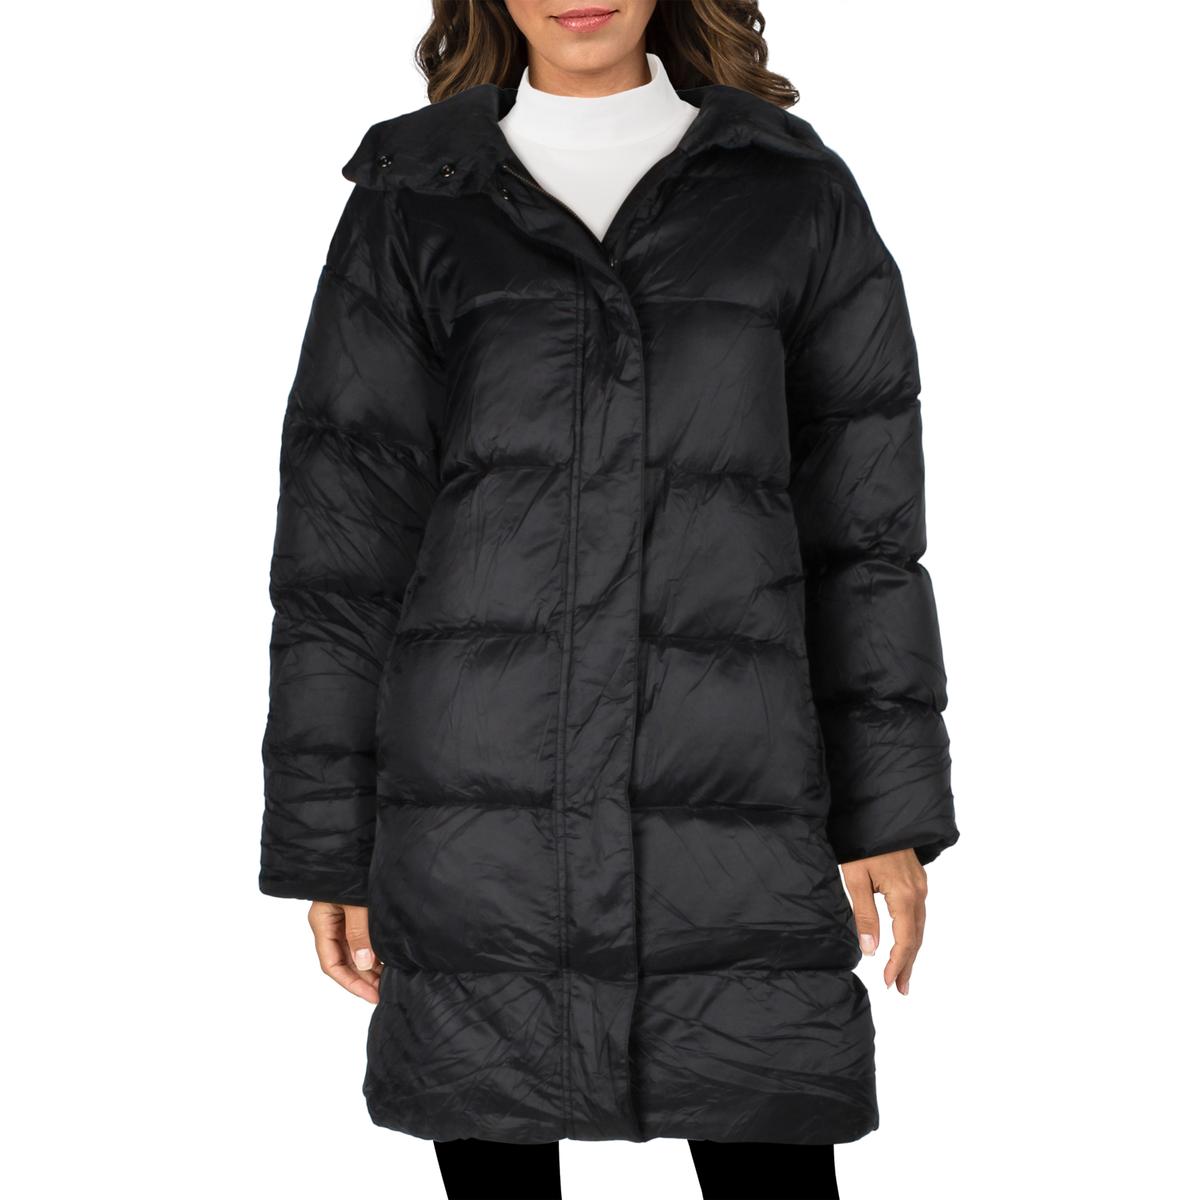 Eileen Fisher Womens Black Winter Down Quilted Puffer Coat Outerwear M ...